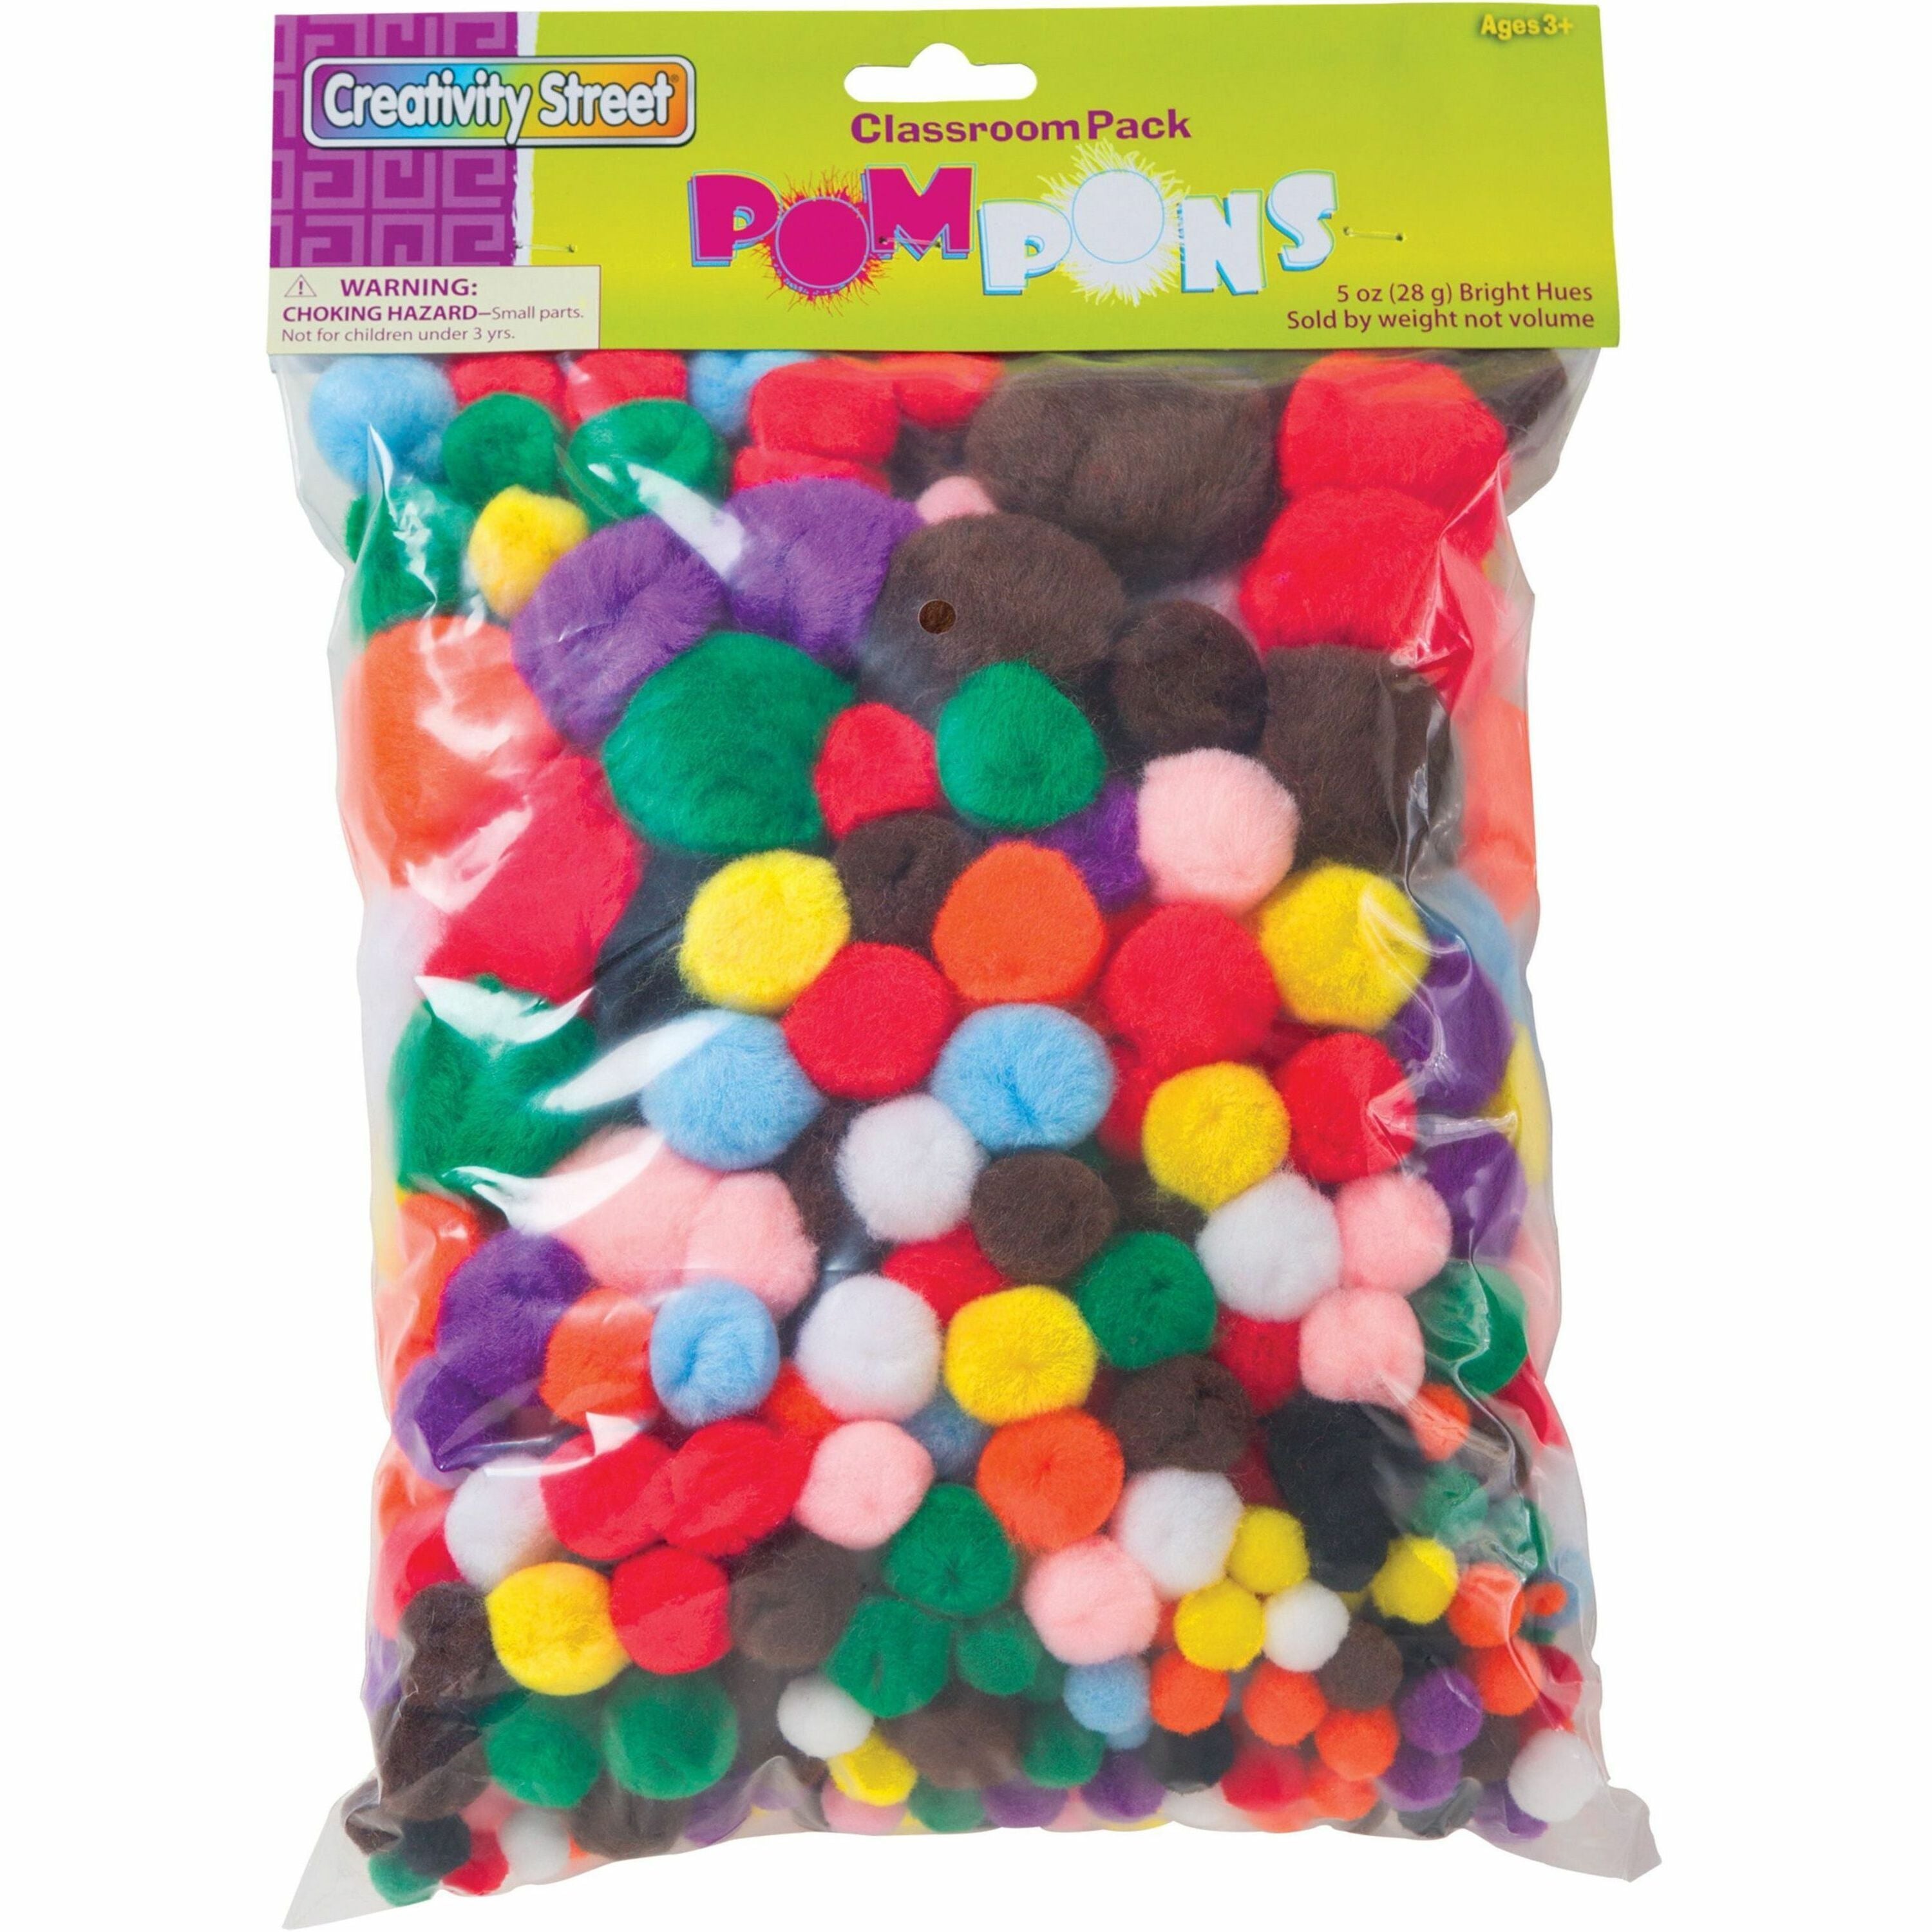 creativity-street-pom-pons-class-pack-classroom-recommended-for-3-year-300-pack-assorted_pacac815001 - 1